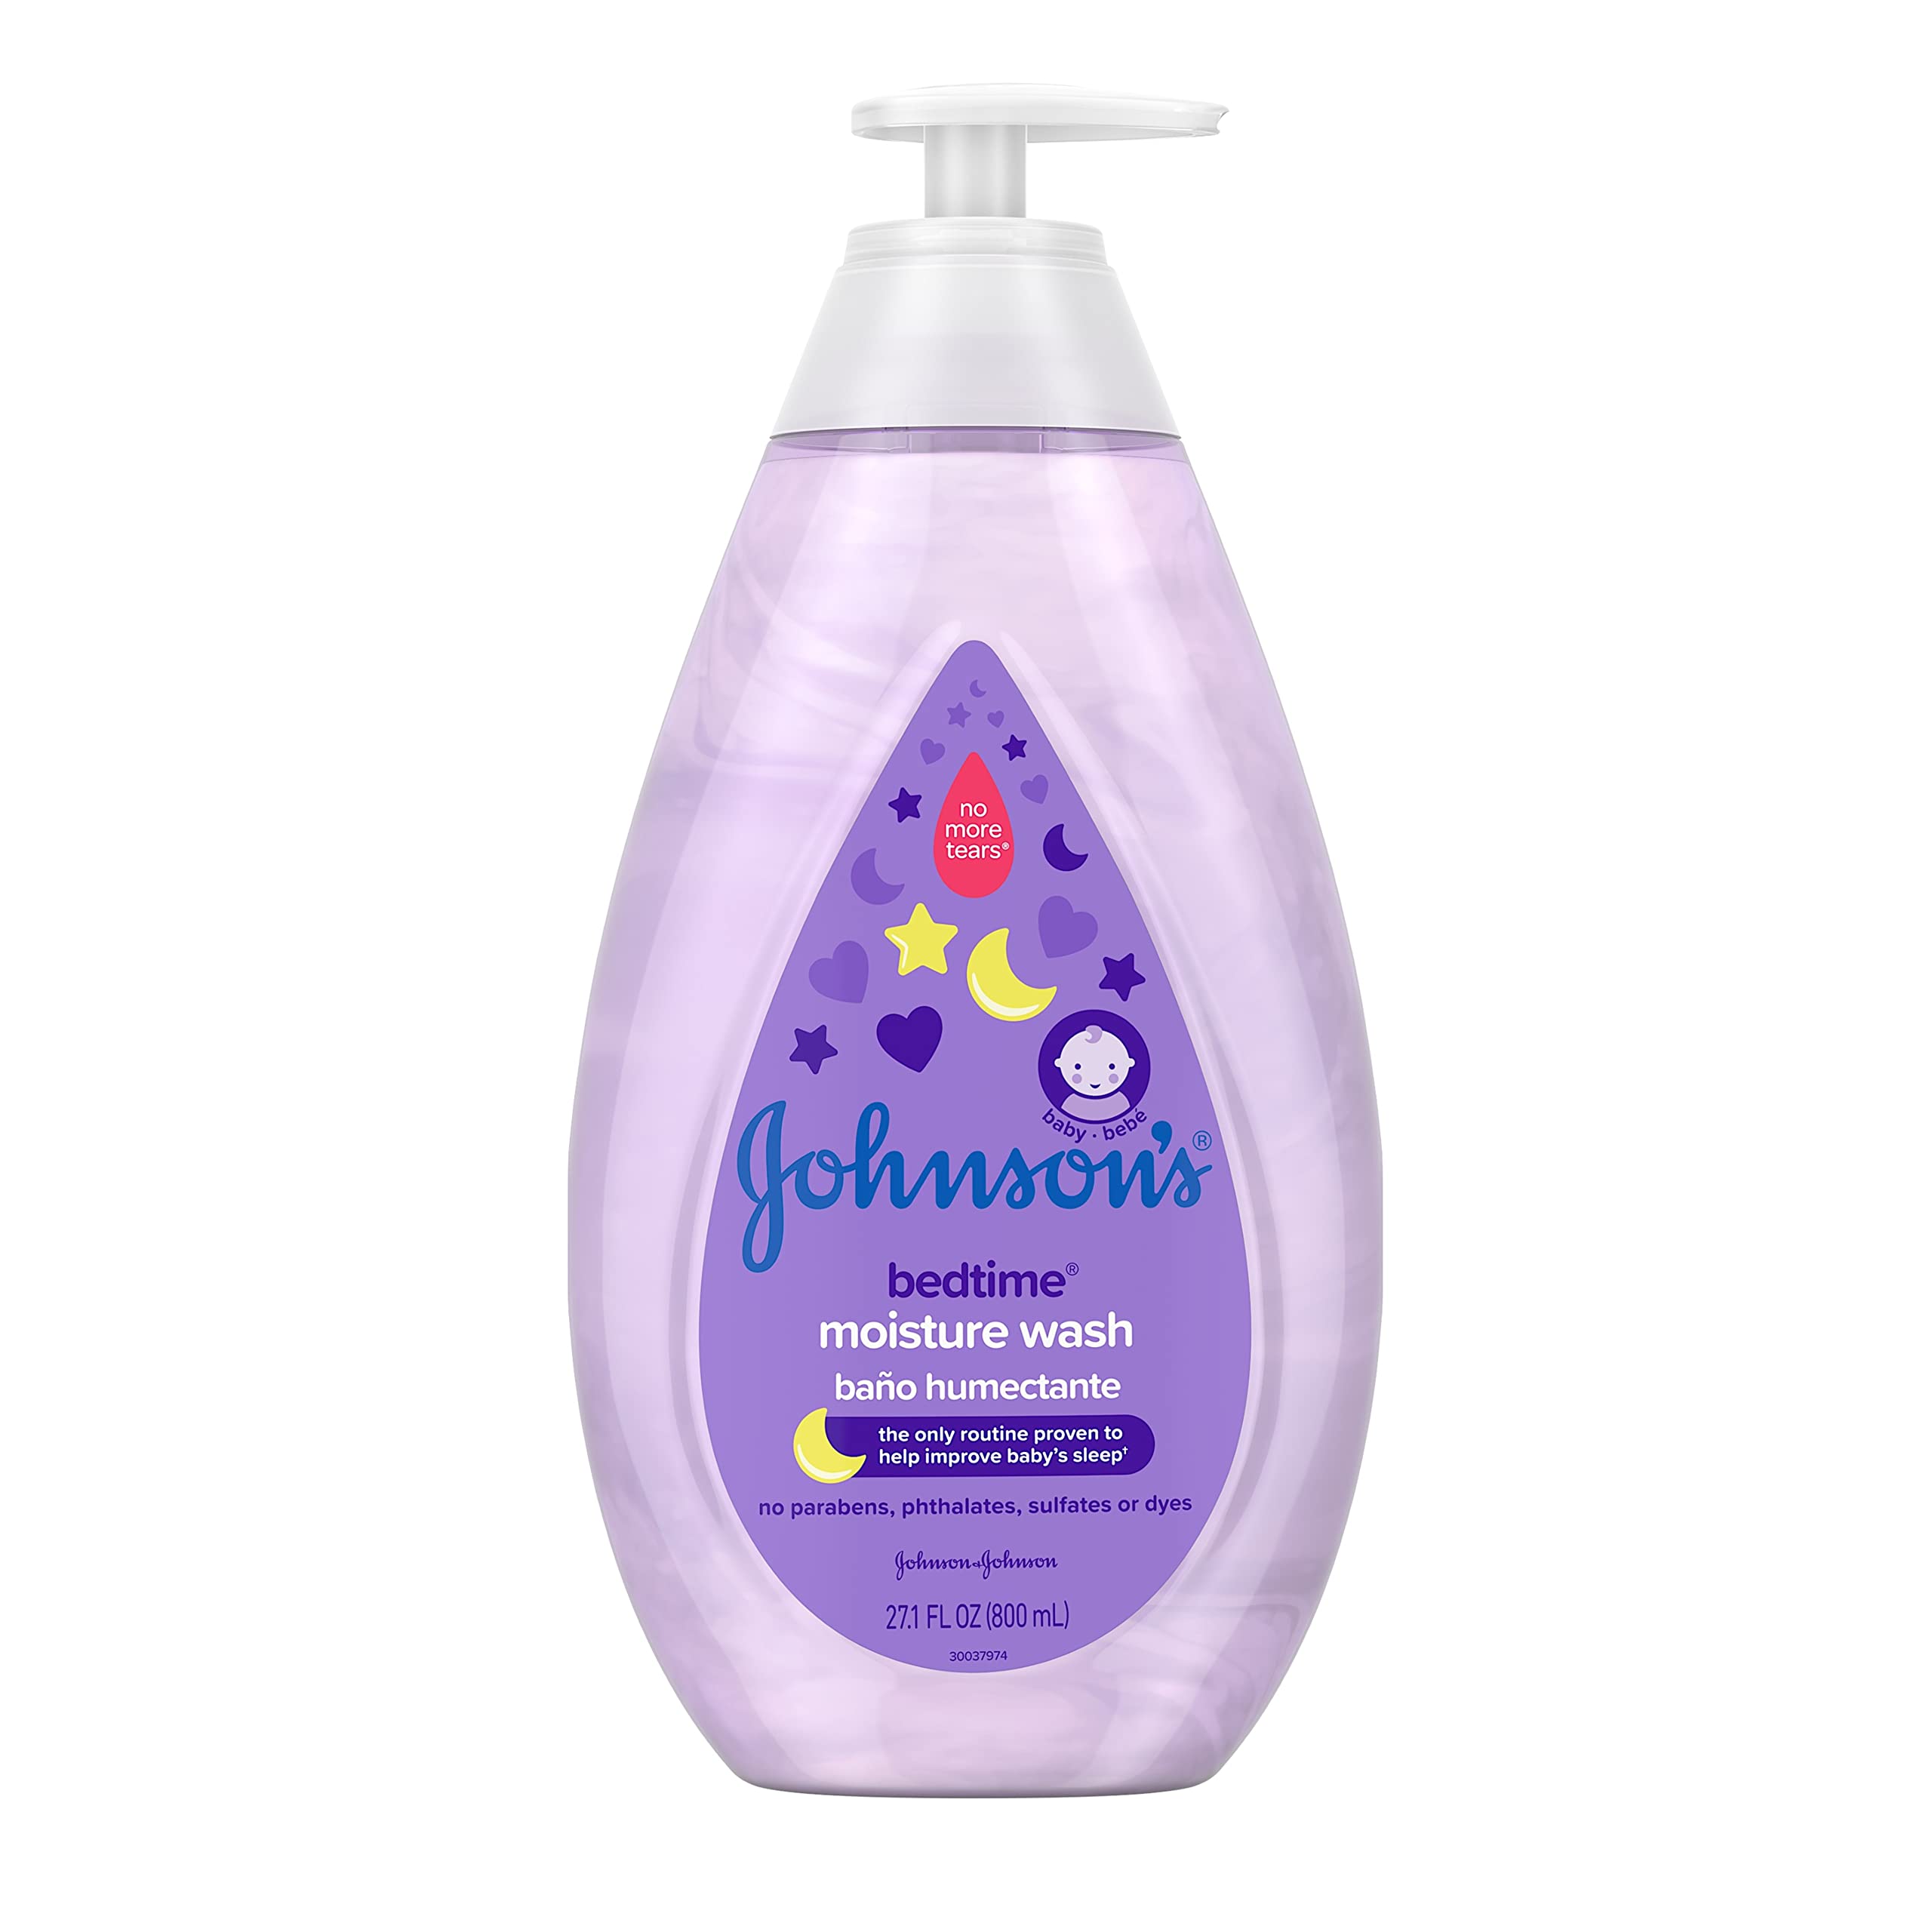 27.1-Oz Johnson's Tear-Free Bedtime Baby Moisture Wash with Soothing NaturalCalm Aromas $5.70 w/ S&S + Free Shipping w/ Prime or on $35+